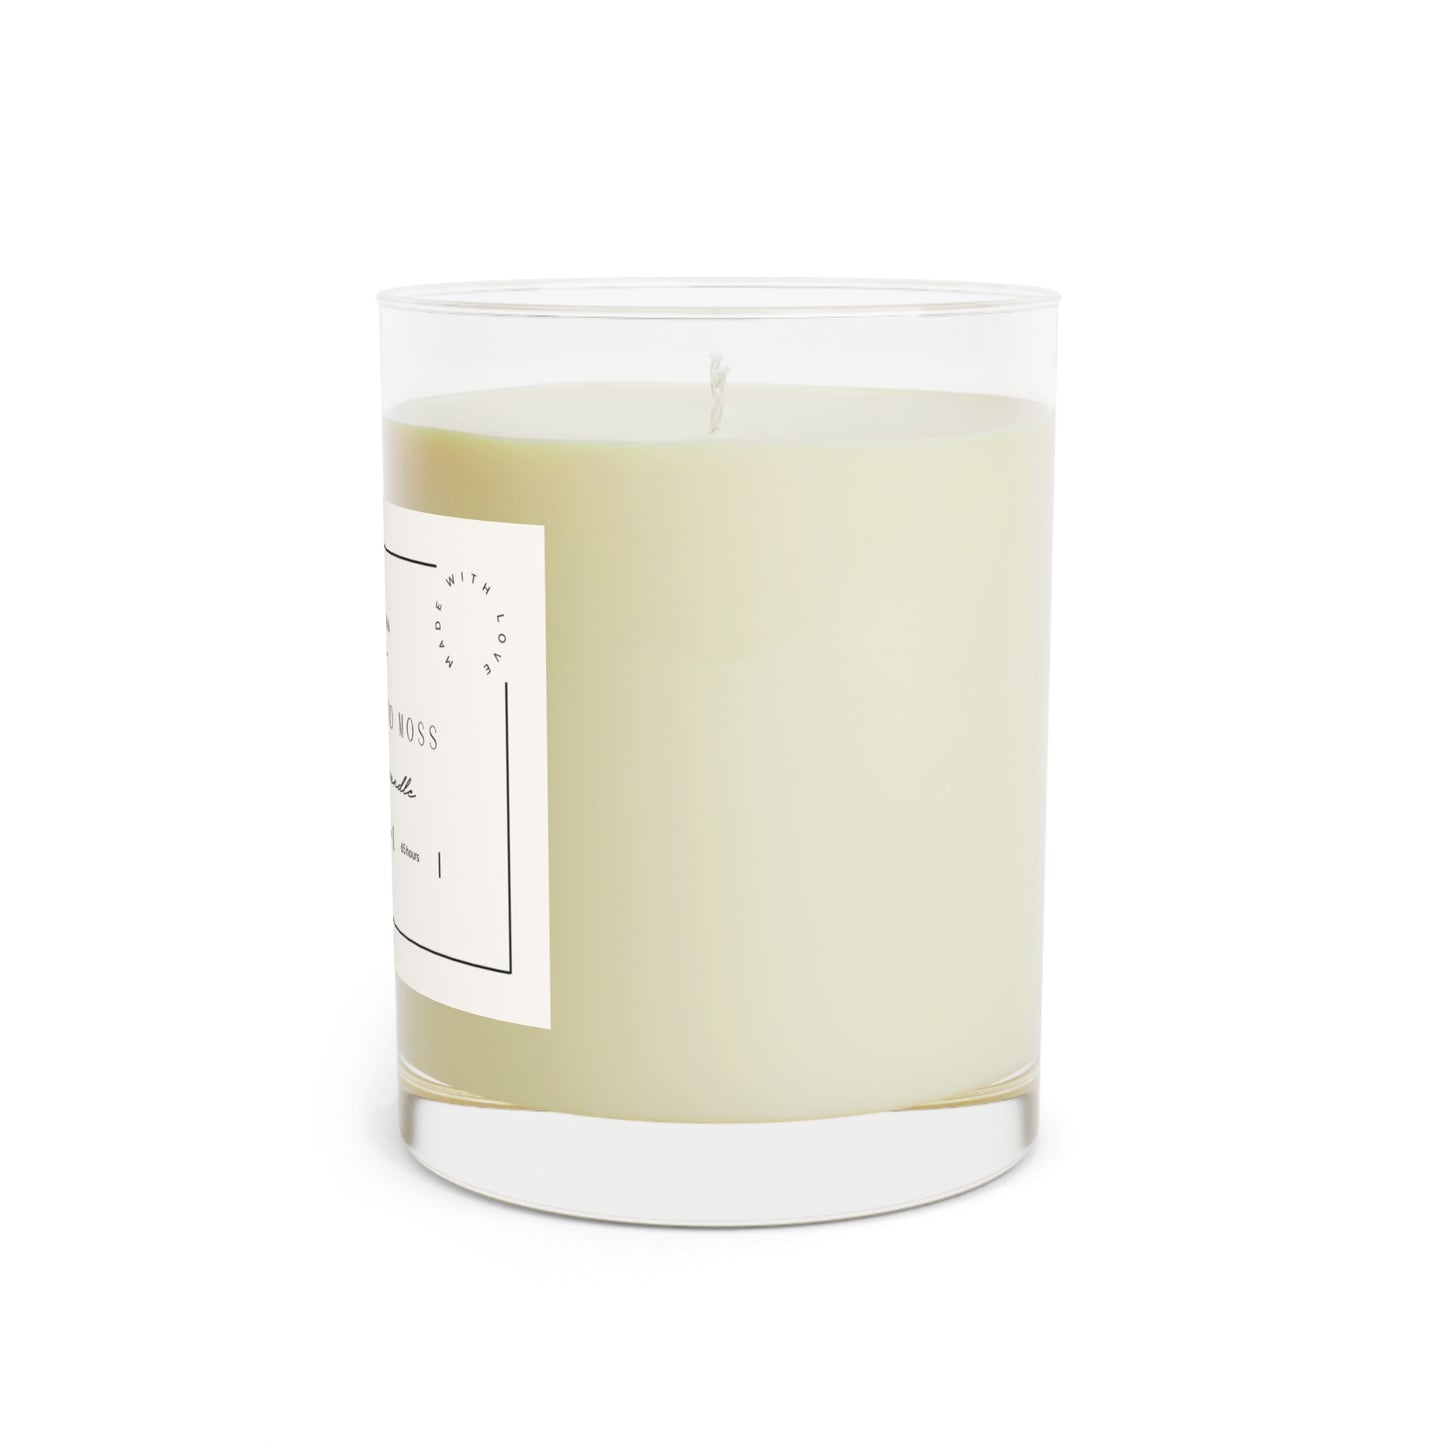 Ocean Mist and Moss Scented Candle - 100% food-grade soy wax, 11oz